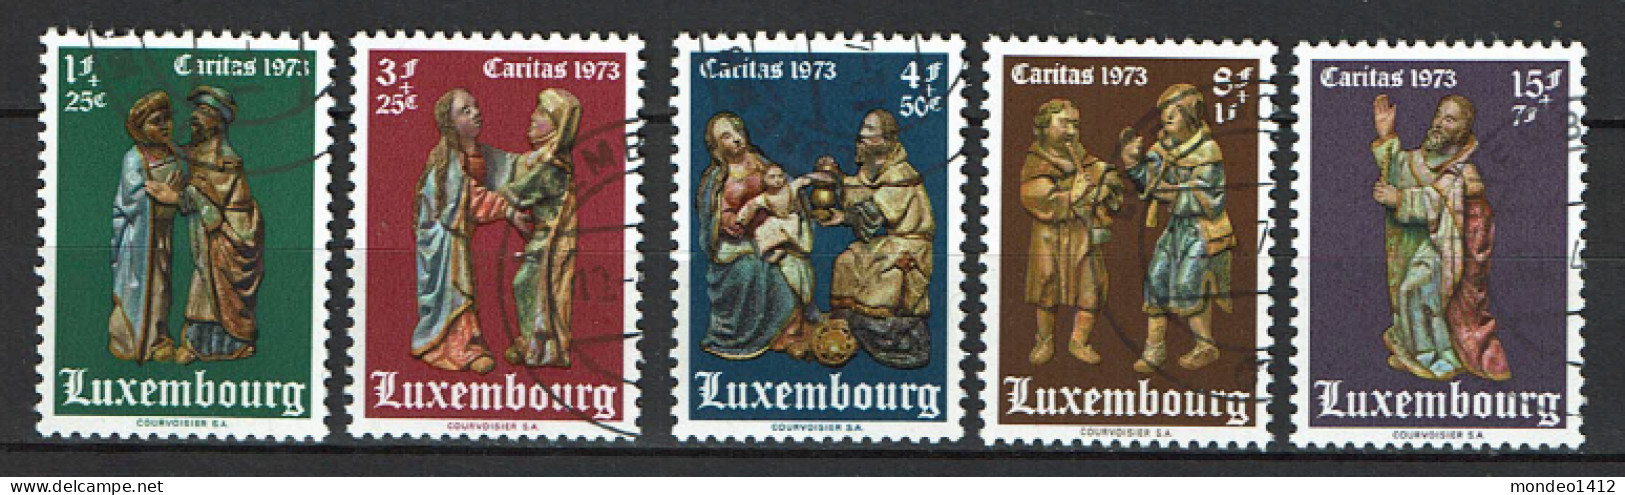 Luxembourg 1973 - YT 821/825 - Religious Statuettes - Charity Issue - Usados